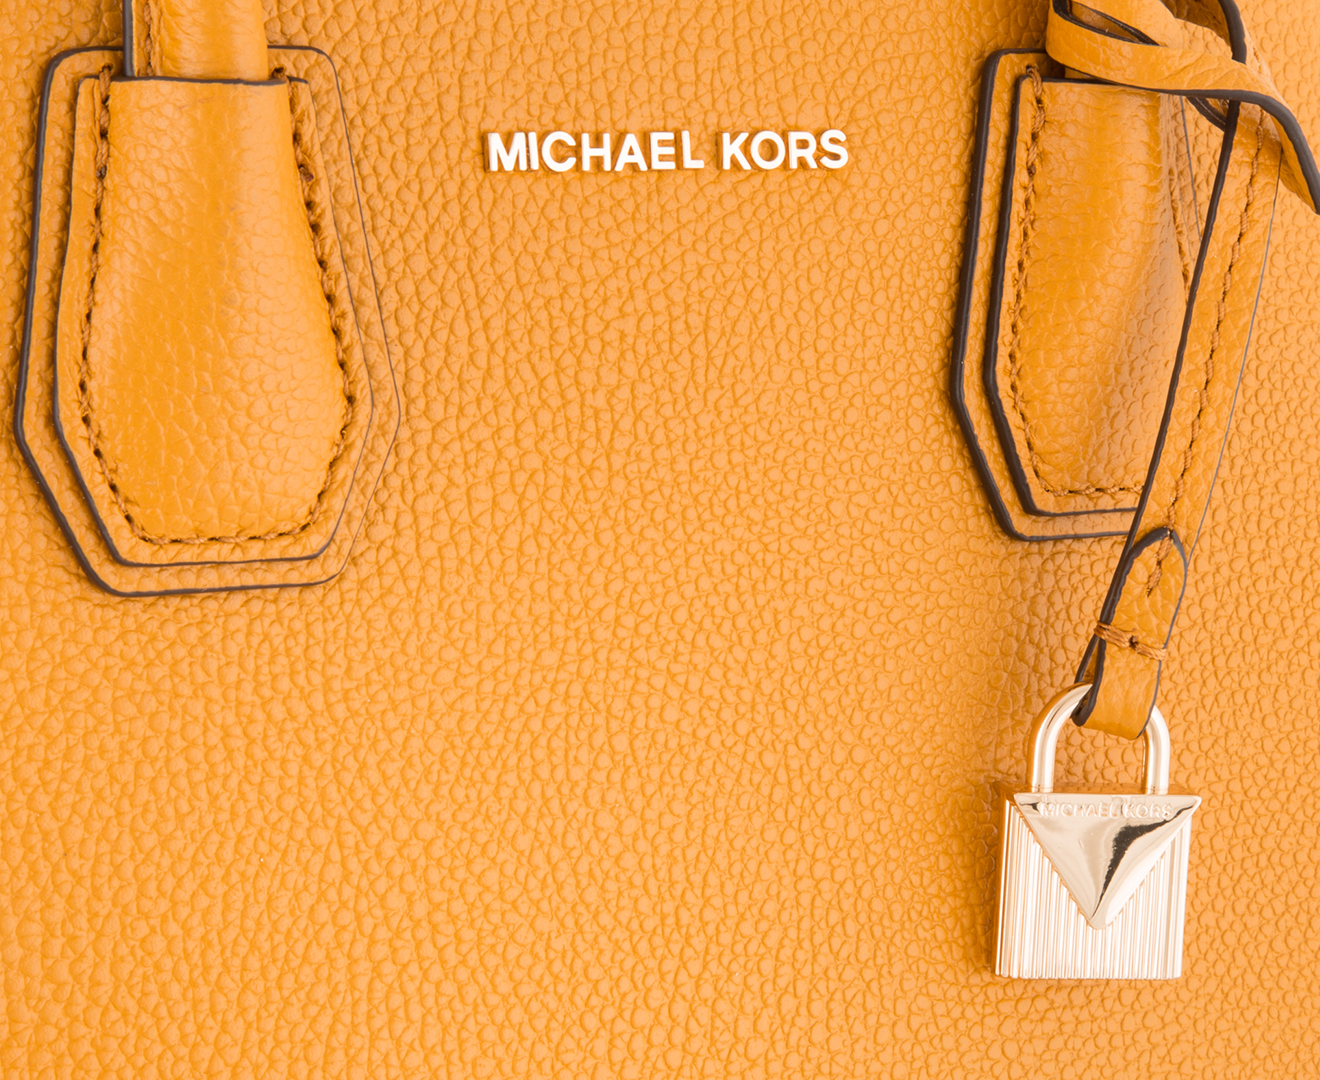 Michael Kors Voyager Large Front Pocket Tote Bag Pebbled Leather Marigold  Yellow